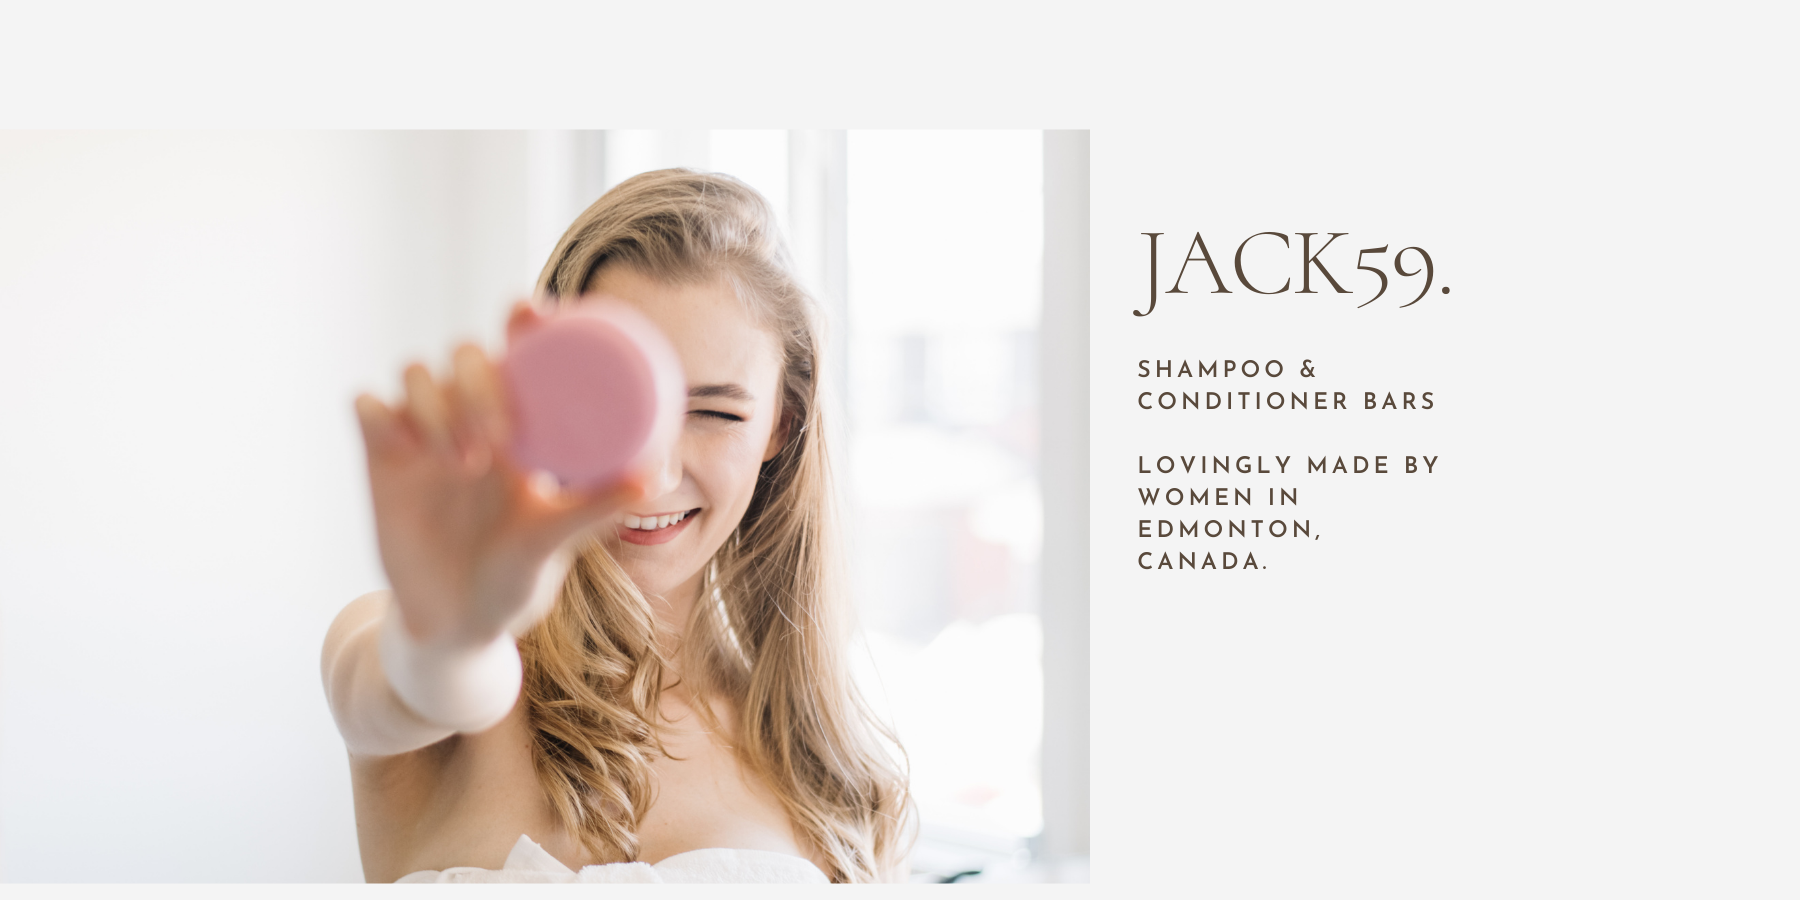 Each Jack59 shampoo bar eliminates up to 3 plastic shampoo bottles and lasts up to 80+ washes! Their conditioner bars can eliminate up to 5 bottles and lasts up to 100+ washes.